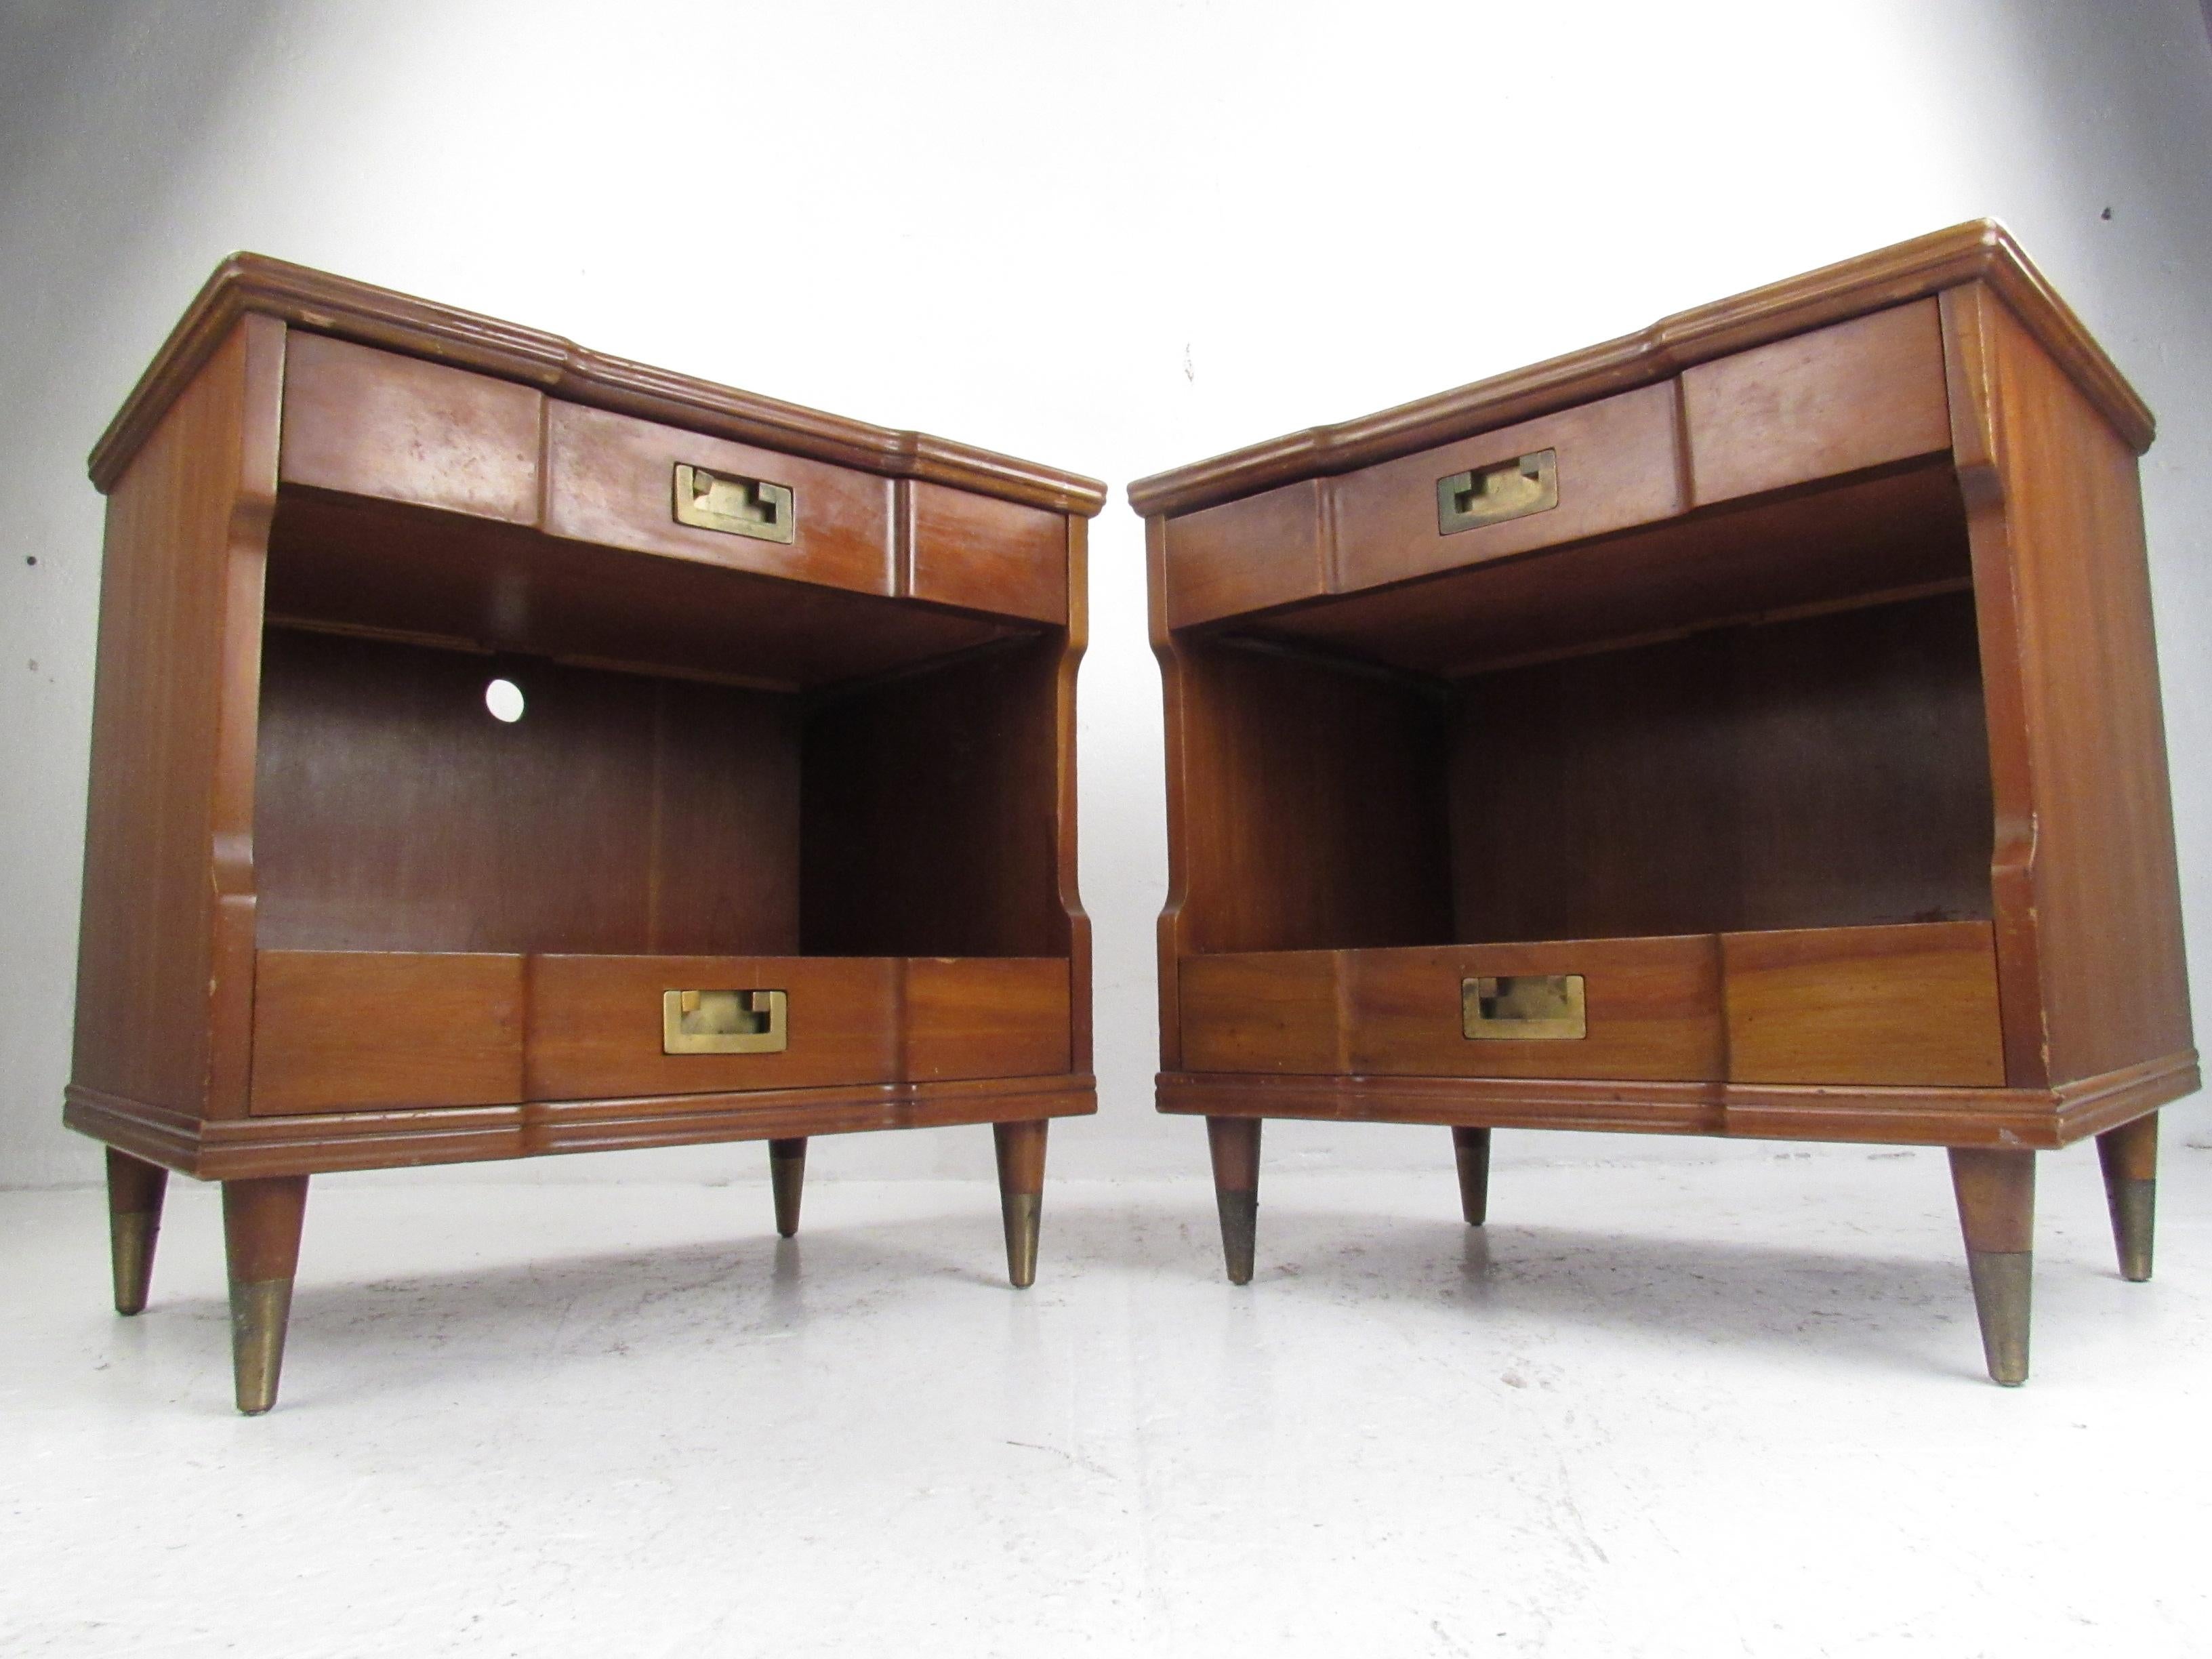 Vintage pair of two-drawer walnut nightstands with brass pulls and sabots, manufactured by Widdicomb Furniture, Grand Rapids, Michigan.
Please confirm item location (NY or NJ) with dealer.